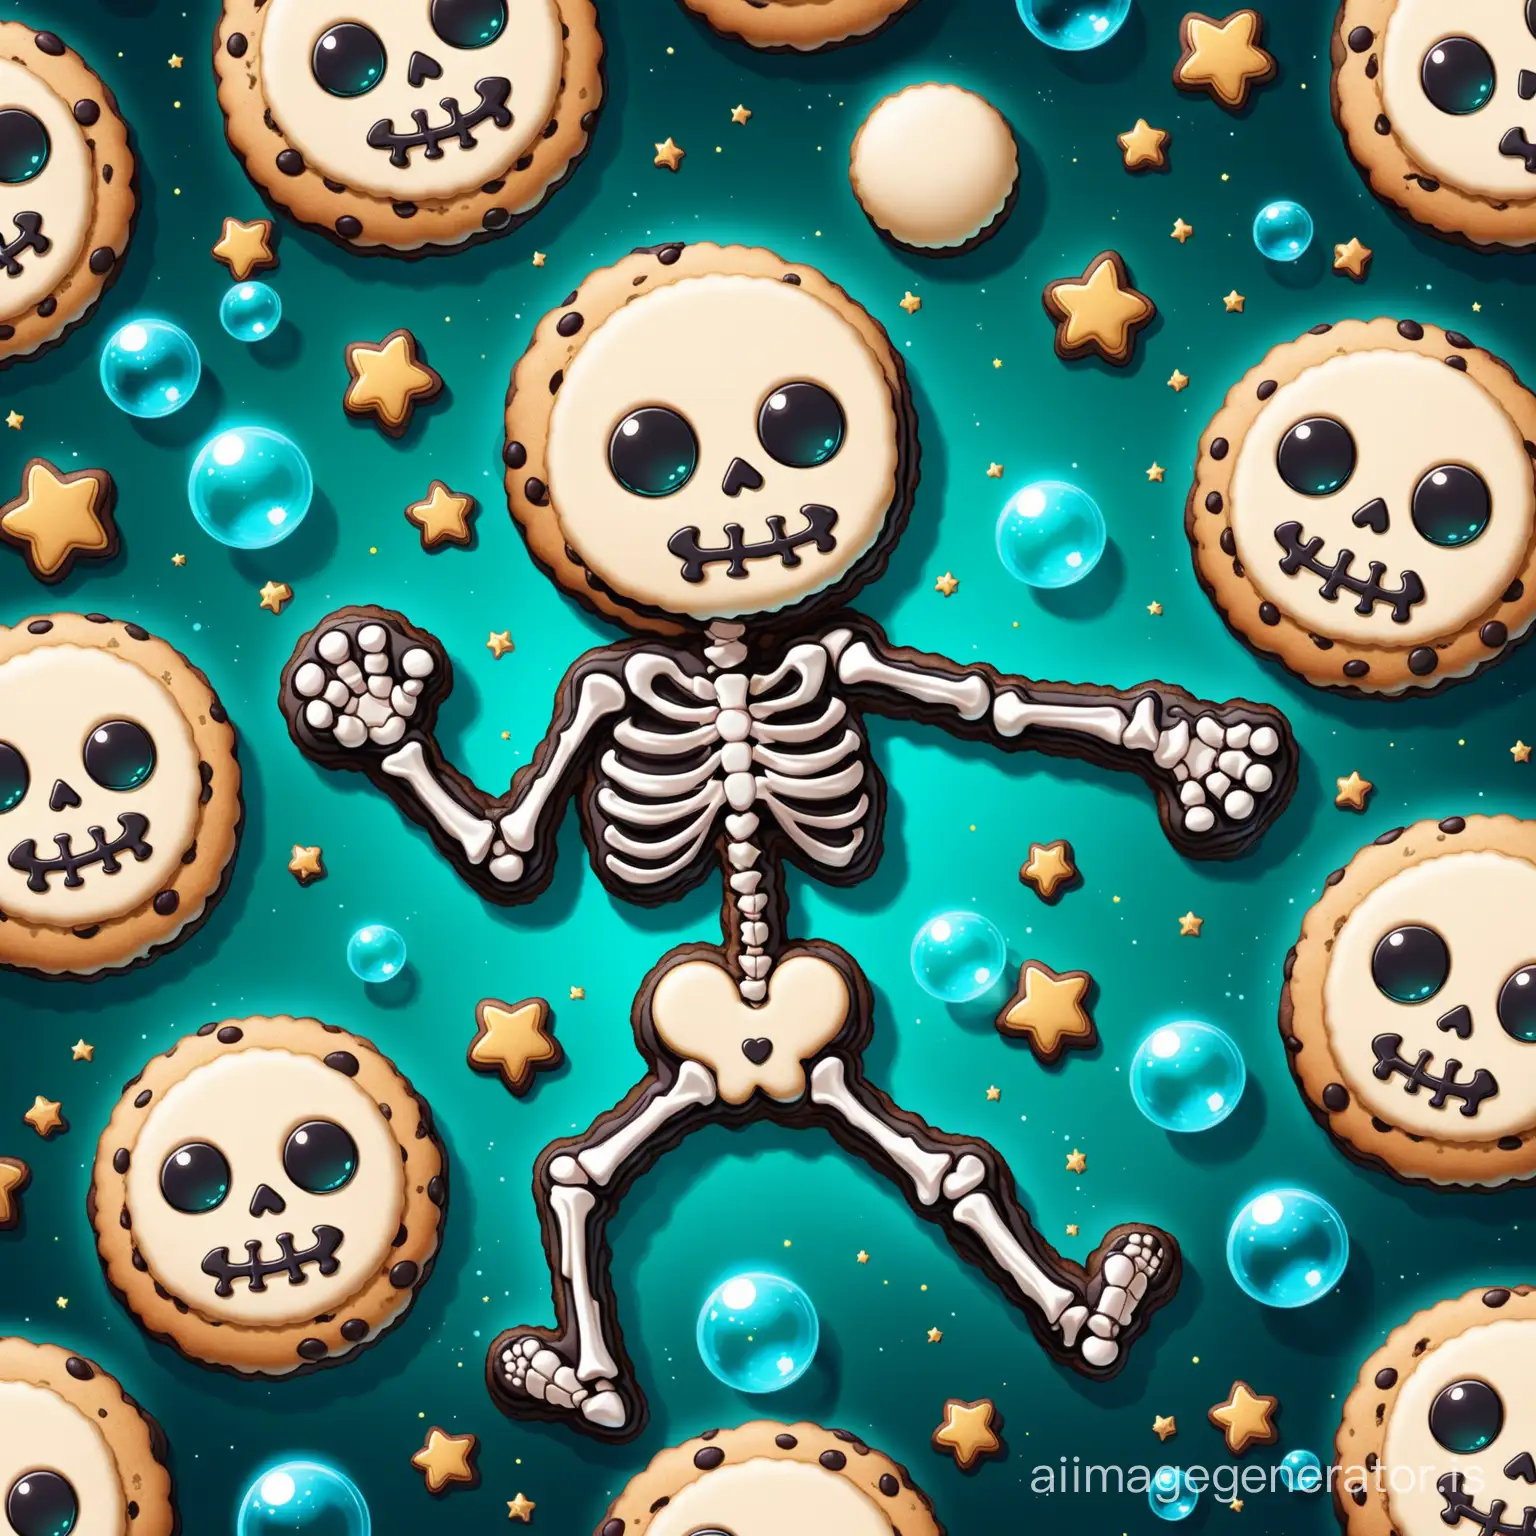 A little black happy cute skeleton cookie with green eye and smile flying on the cookie jungle with super detail and High Quality
big and blue Bubble and floating cookie are seen everywhere
Details are evident beautifully and with great precision